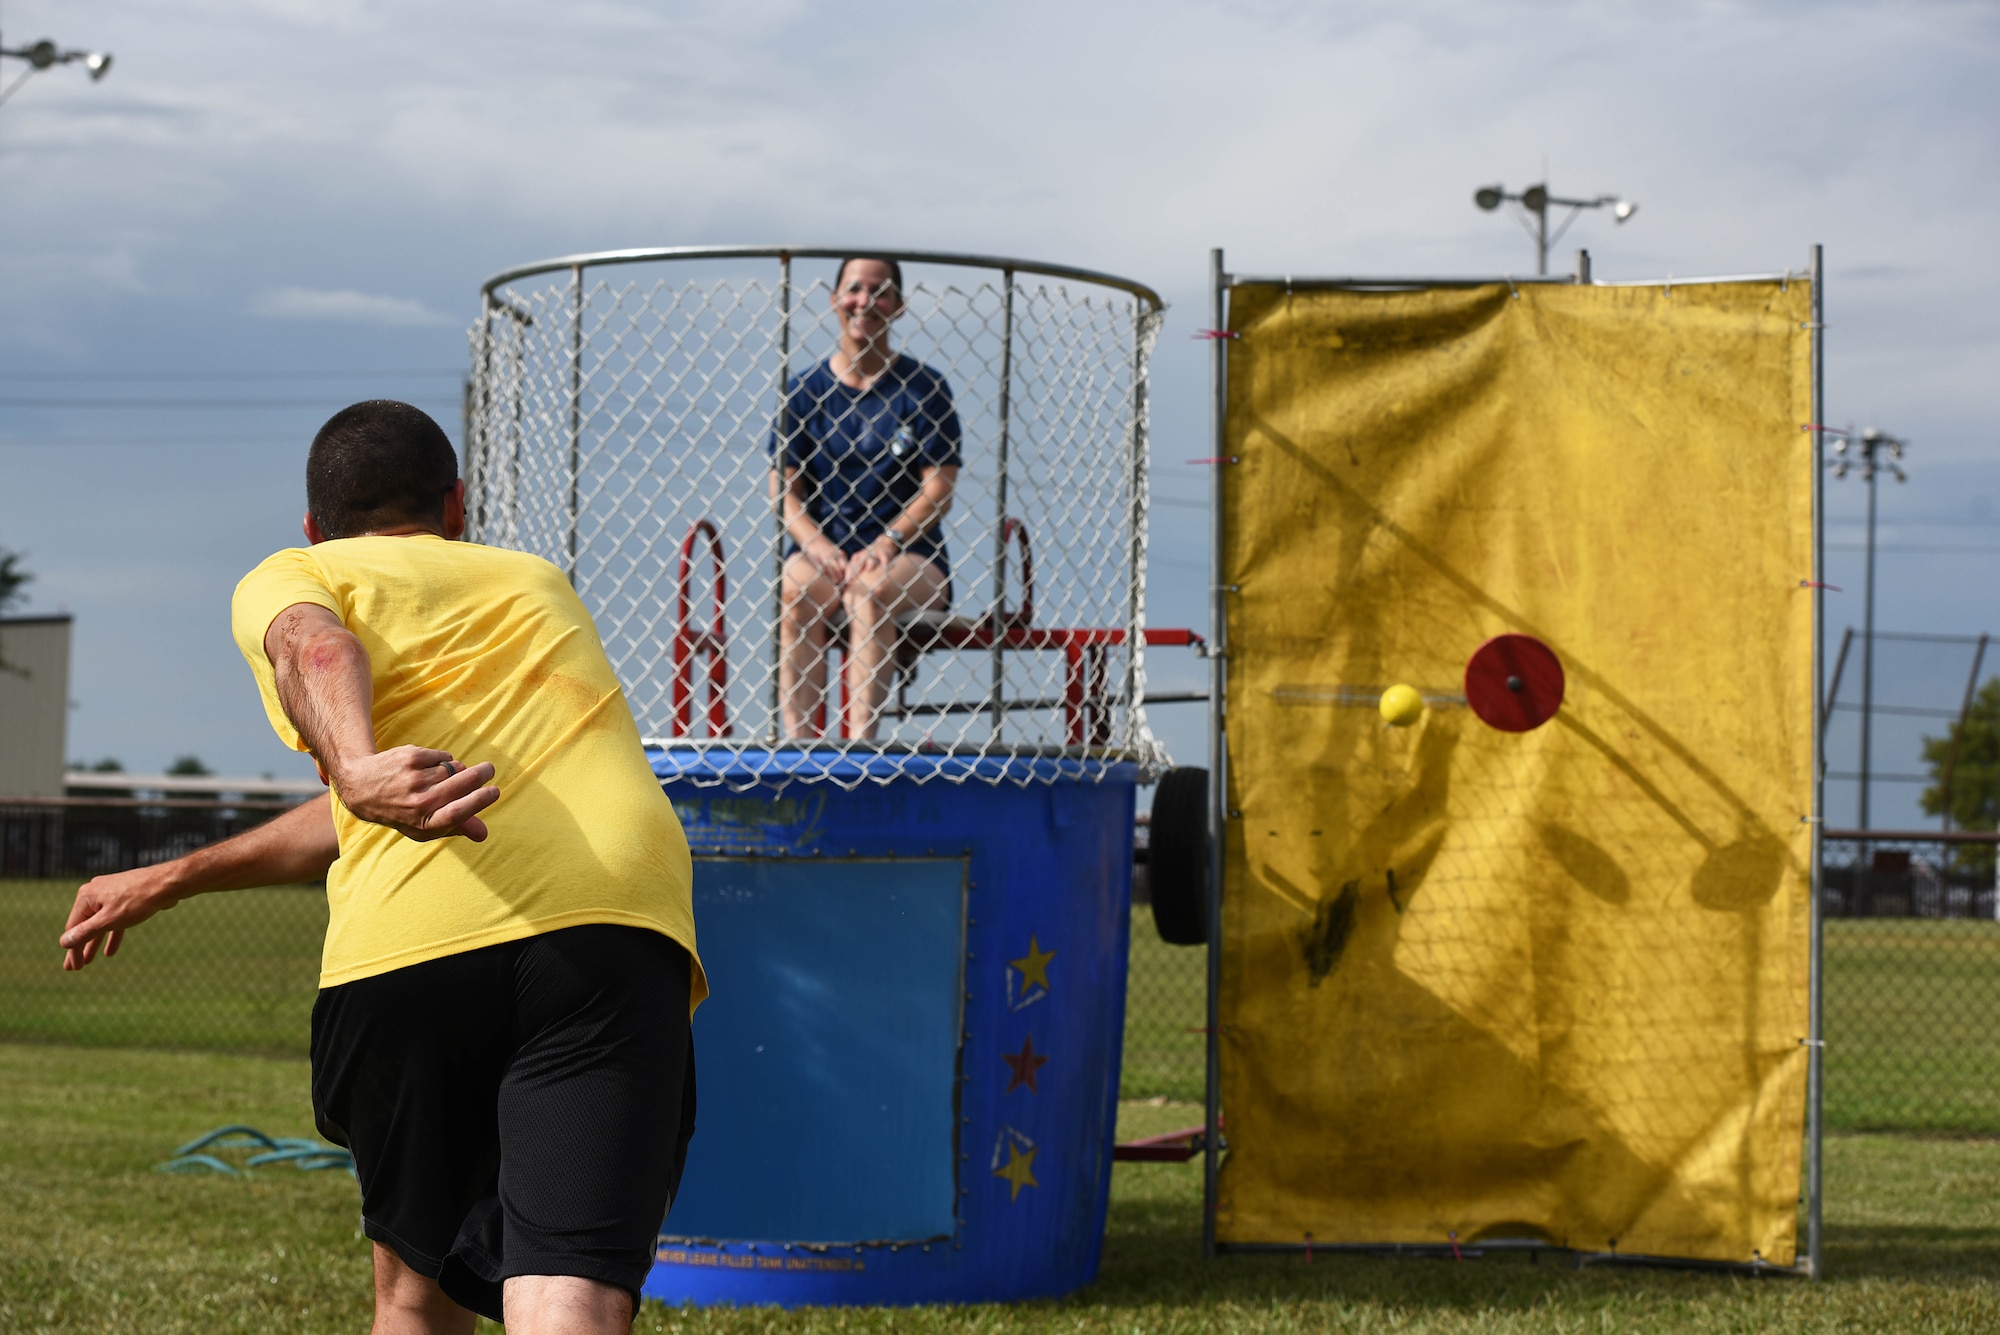 Staff Sgt. Jonathan Rosales, former 14th Flying Training Wing command chief executive assistant, throws a ball at the dunk tank while Col. Samantha Weeks, 14th Flying Training Wing commander, sits on a dunk stool during BLAZE Fest July 3, 2019 on Columbus Air Force Base, Miss. A variety of activities and contests were held throughout the festival for attendees to participate in. (U.S. Air Force photo by Senior Airman Keith Holcomb)